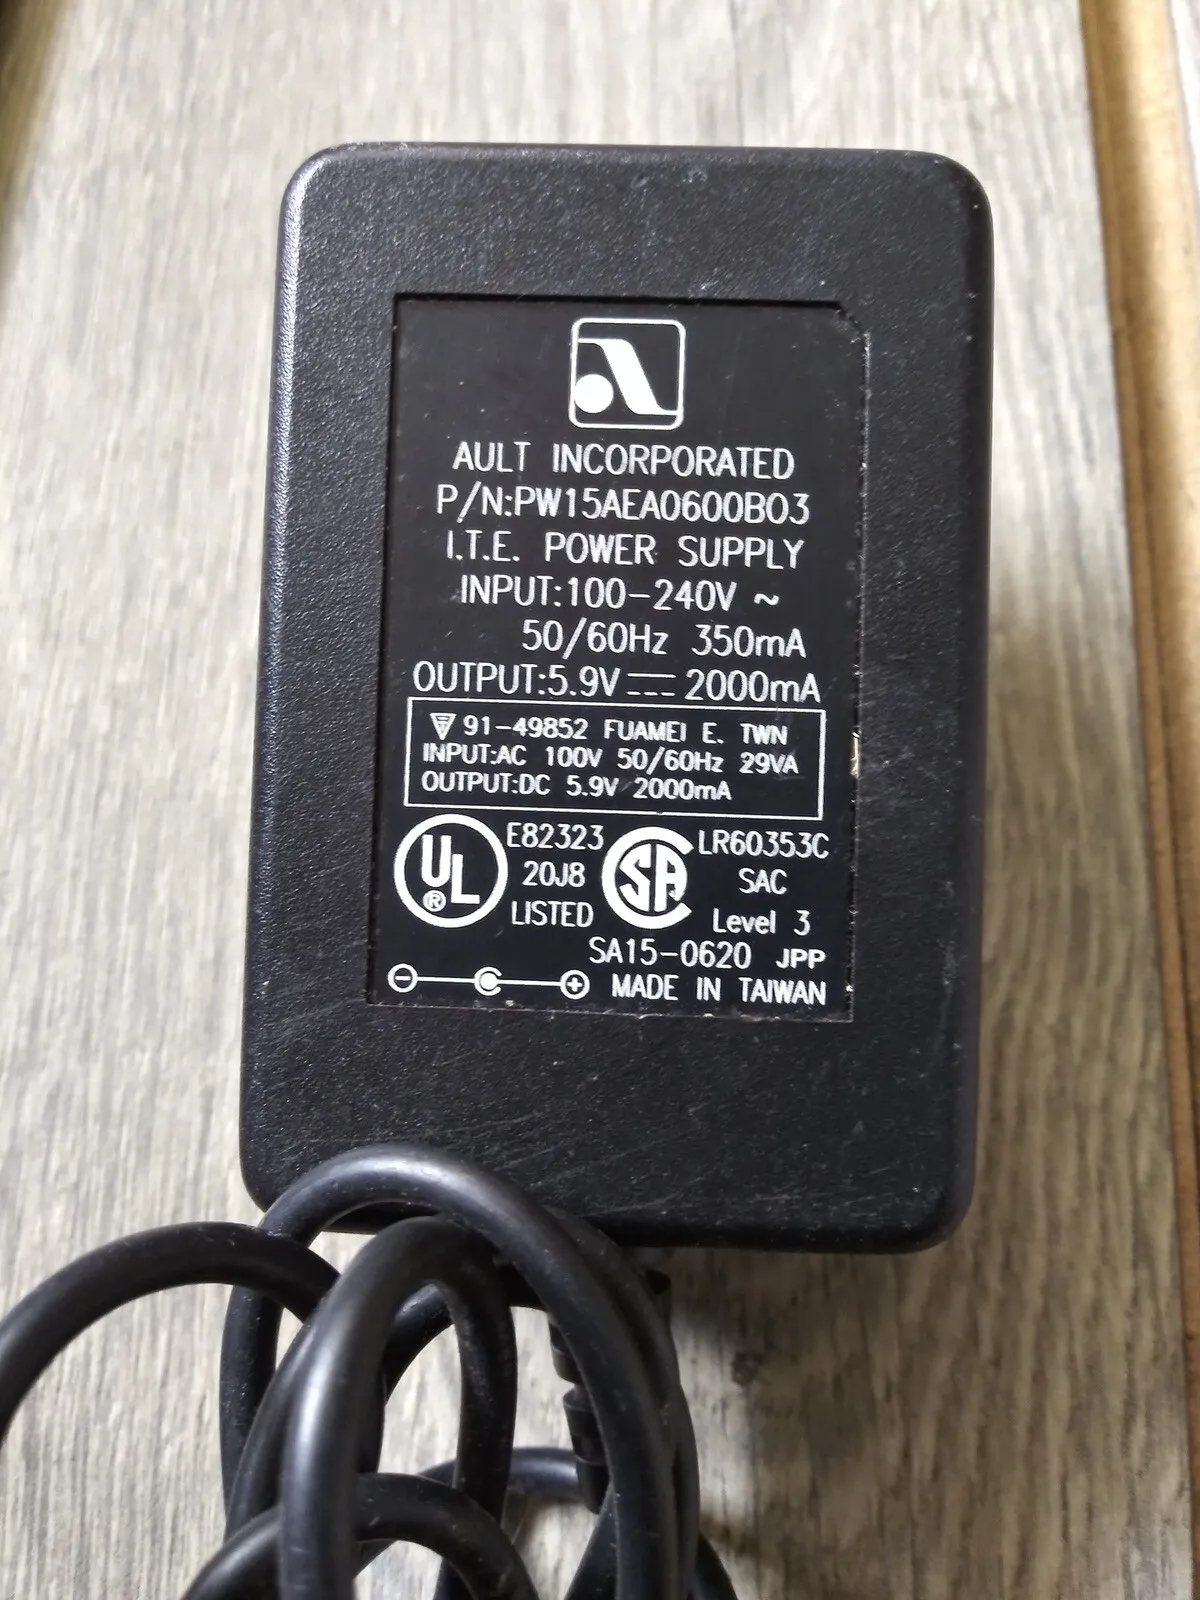 *Brand NEW*AULT INC PW15AEA0600B03 9V 2000mA 2A AC DC Adapter Power Supply